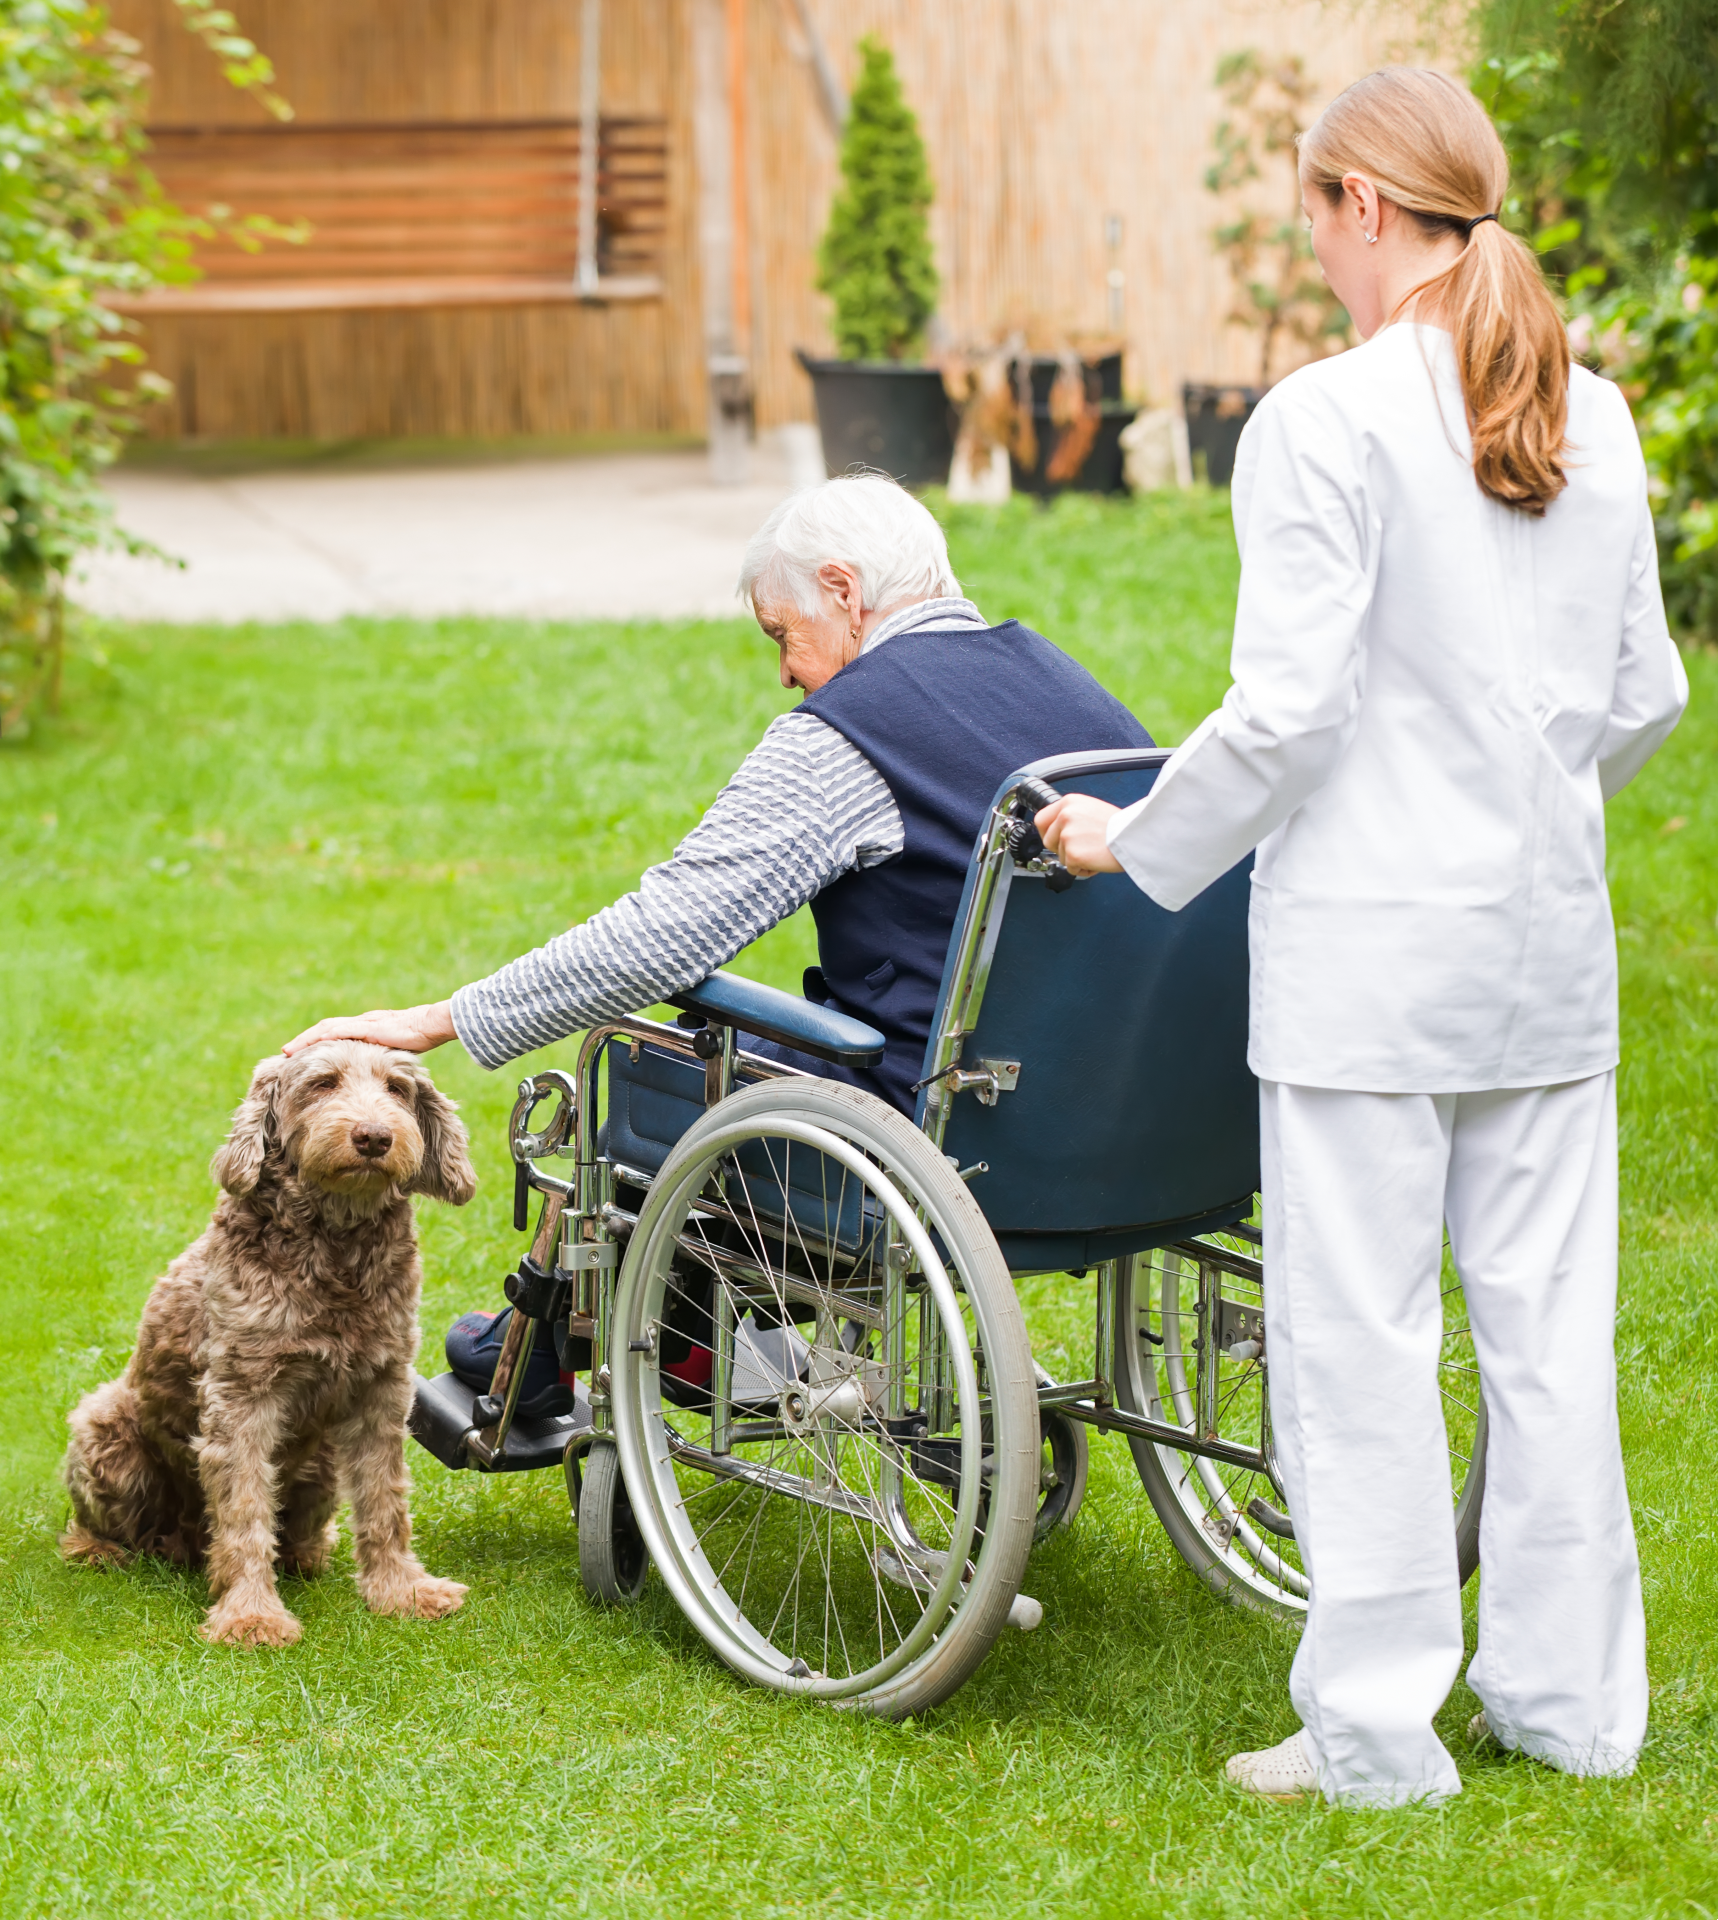 Senior man in a wheelchair petting a dog with his caregiver behind him